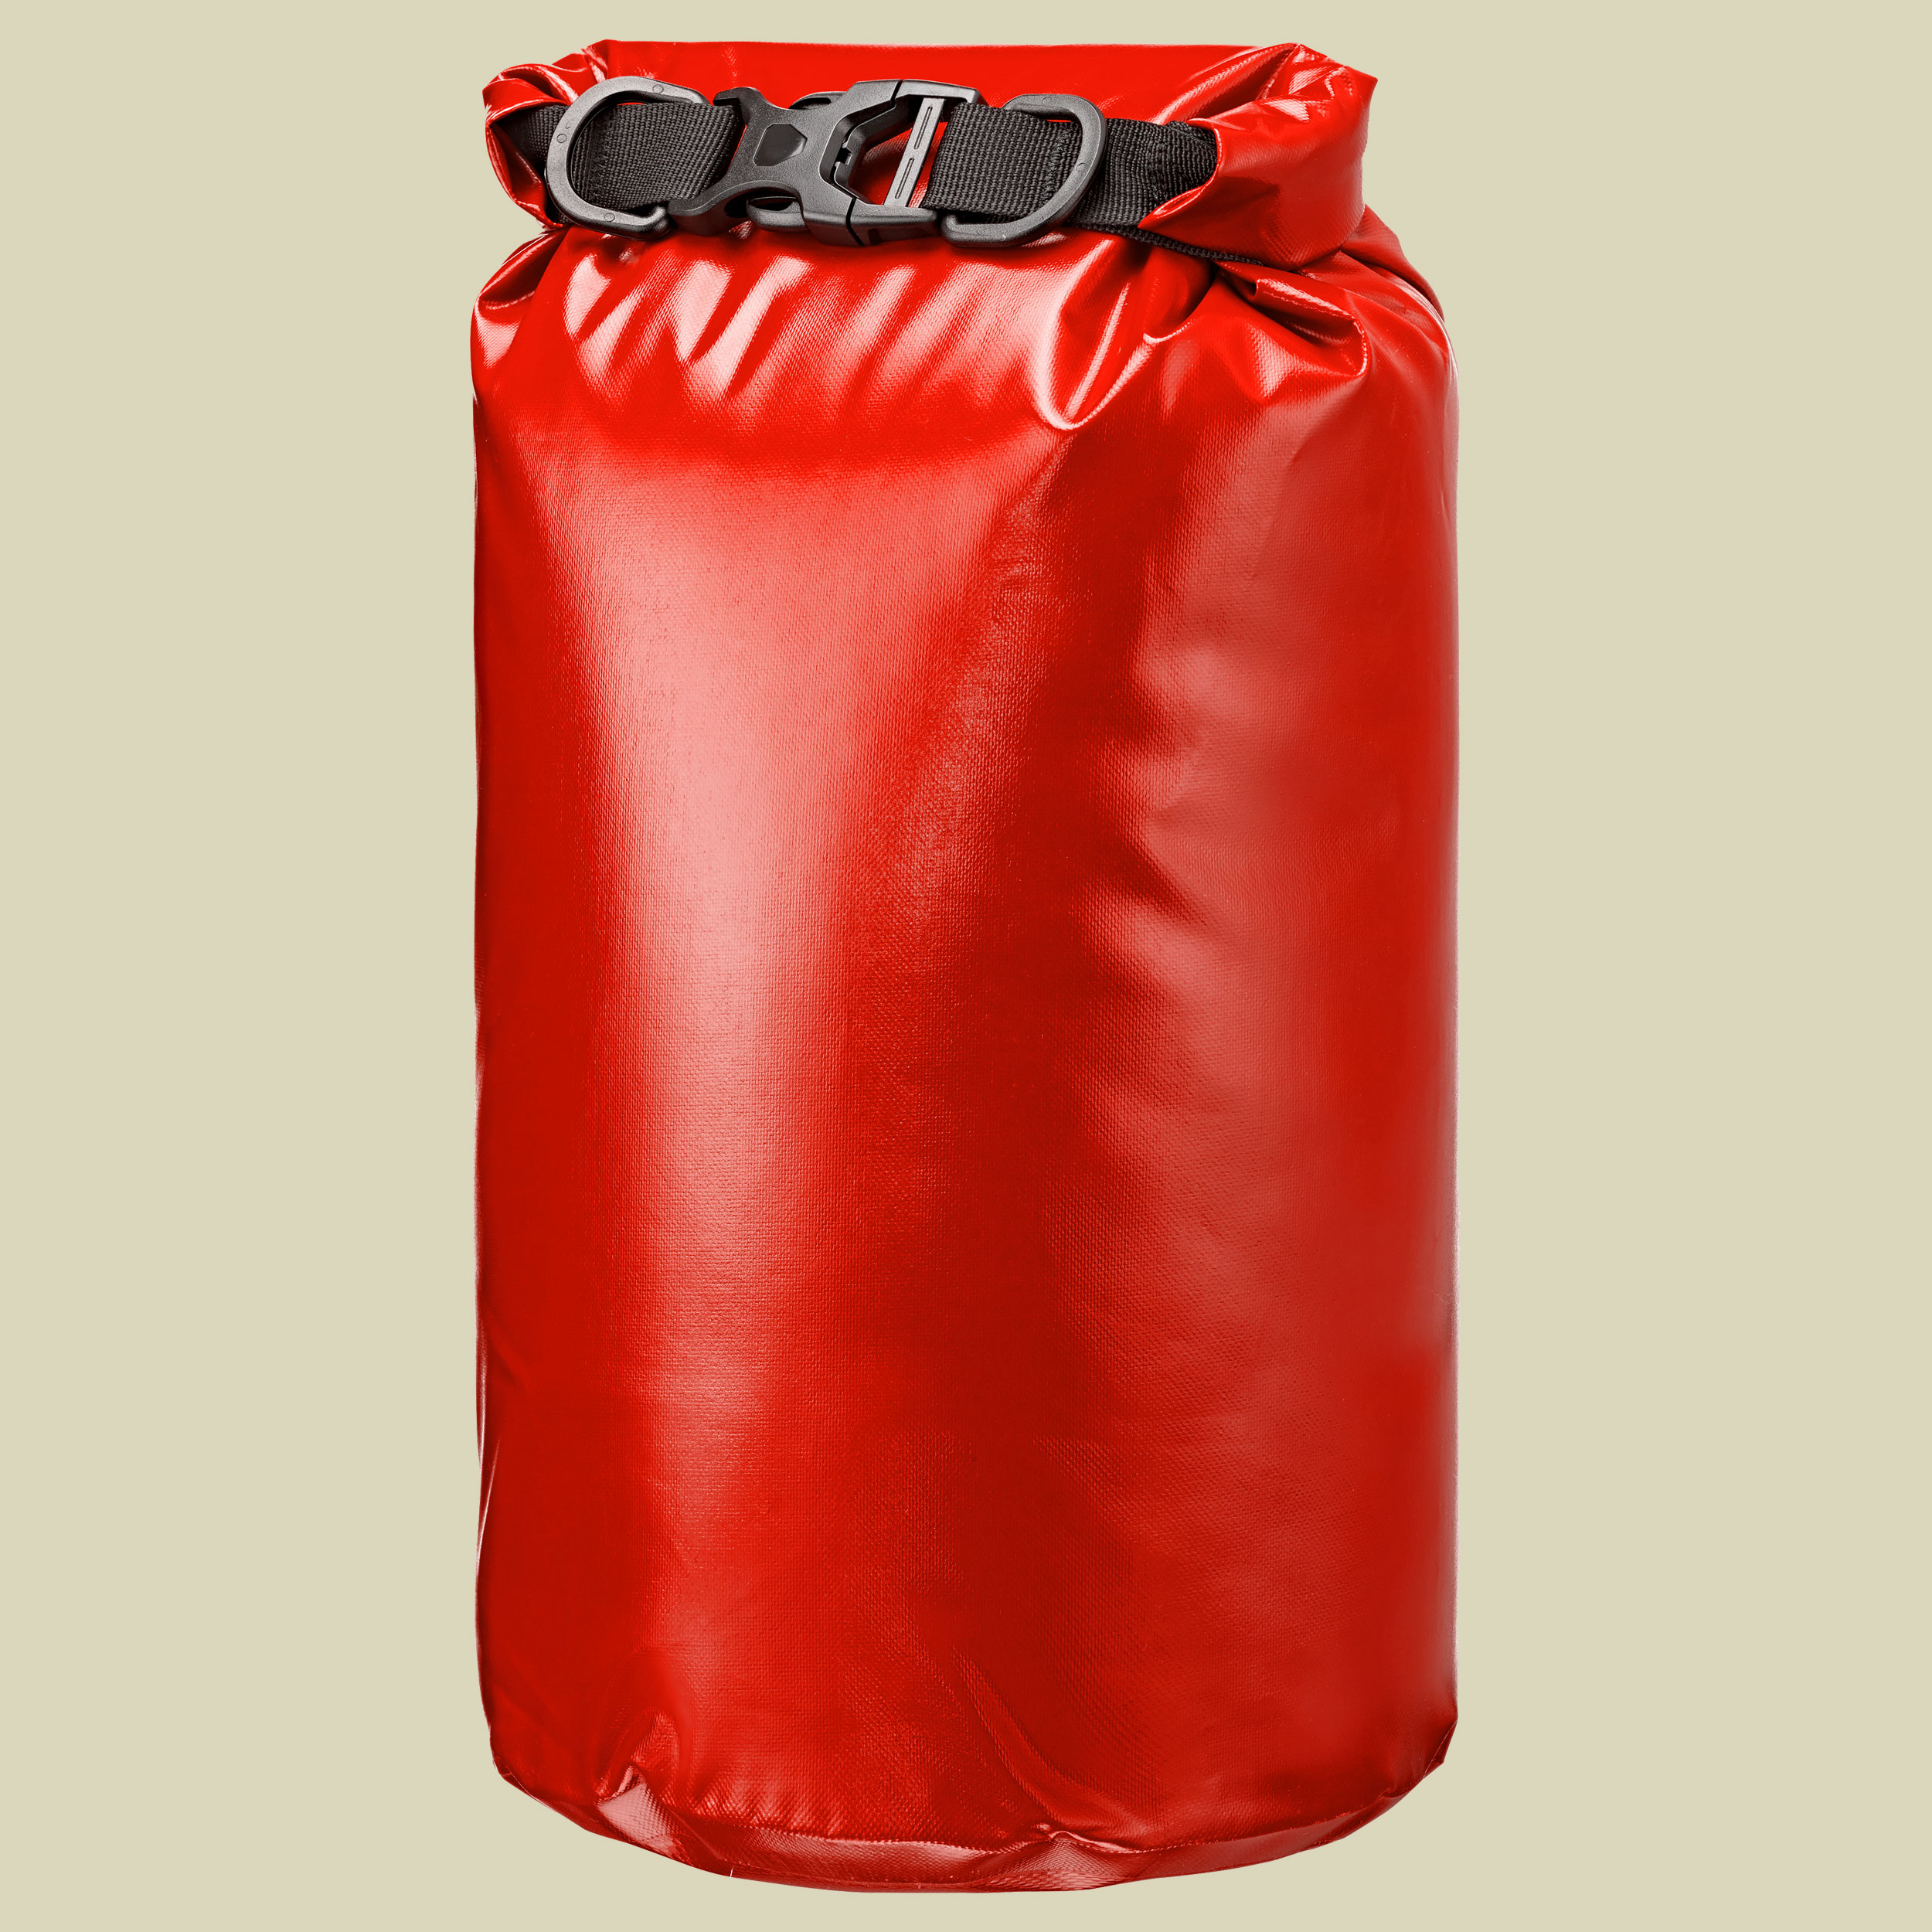 Dry-Bag PD 350 Volumen in Liter 7 Farbe cranberry-signalrot